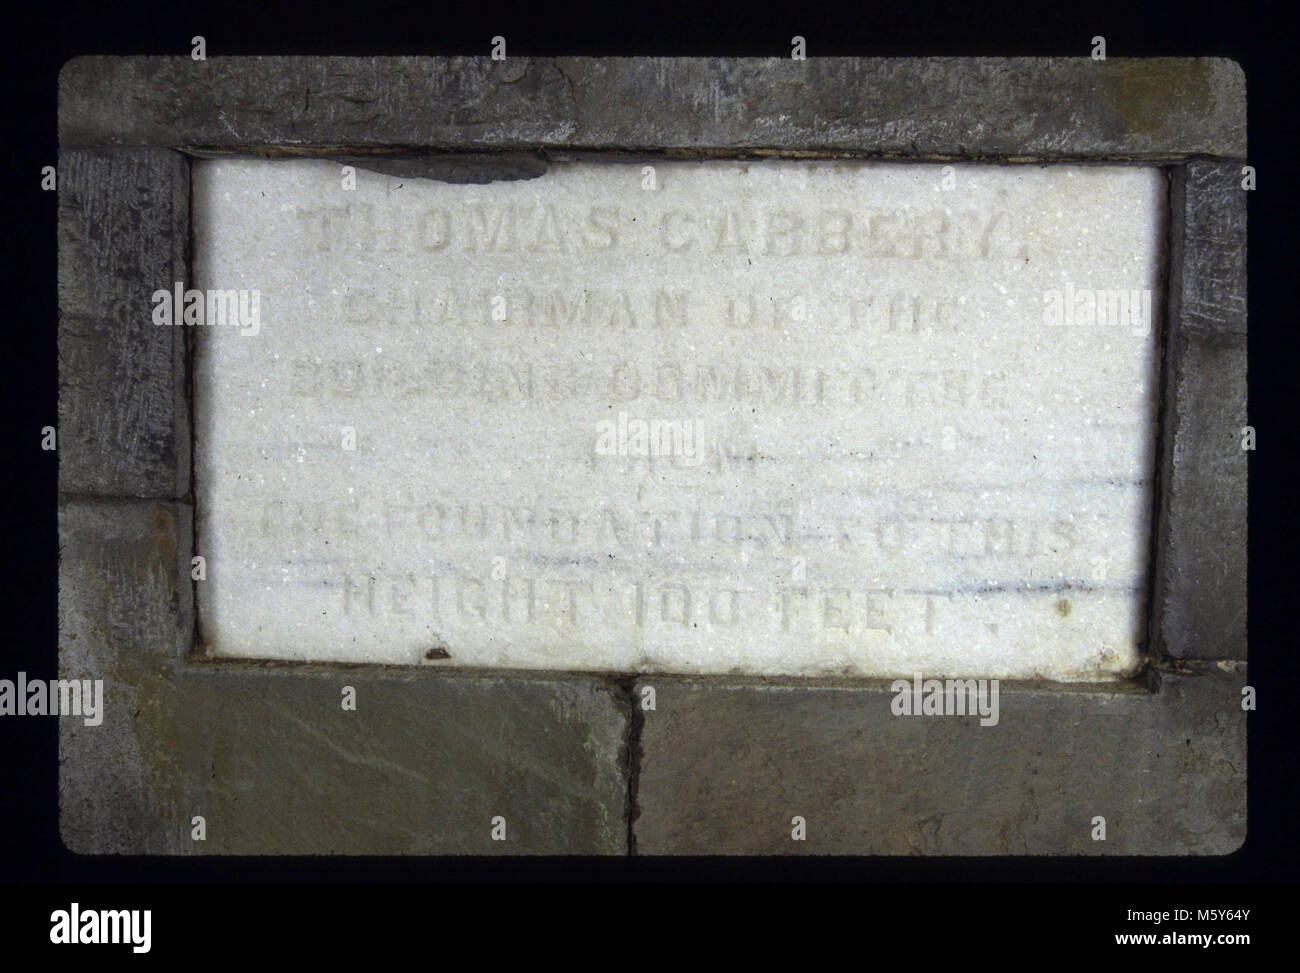 Chairman of the BuildingCommittee Level: 70.5-ft. Donor: Thomas Carberry  Dates: 1850s/1850s  Original material: marble Dimensions: 2' 6 x 5' Sculptor/Carver: not known Original inscription: Thomas Carberry. Chairman of the Building Committee from the foundation to this height 100 feet. Stock Photo